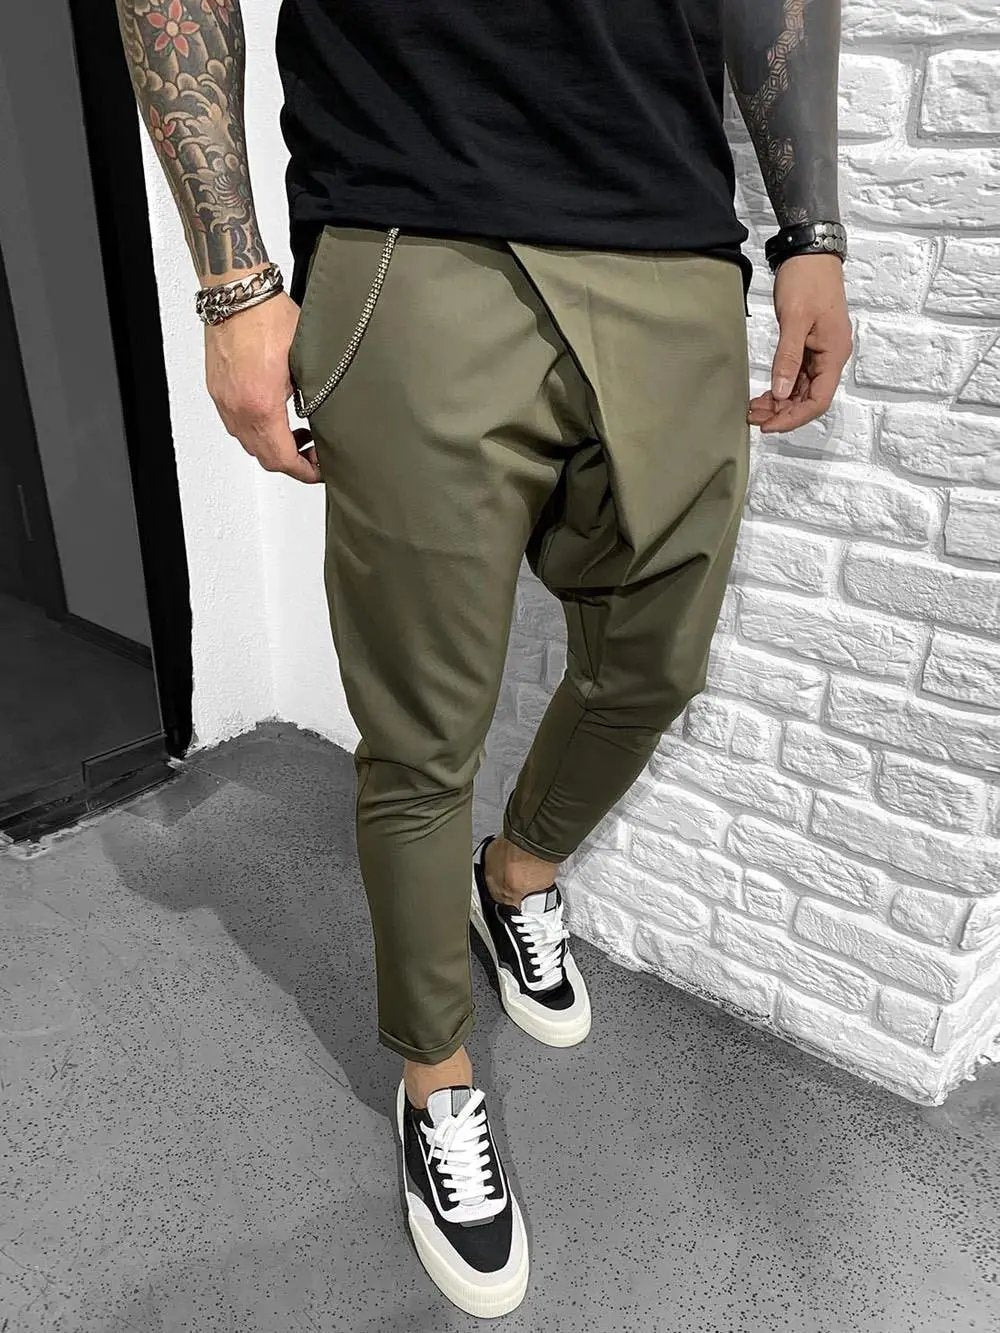 A man with tattoos wearing olive green ASSYMMETRIC ROLL UP pants.